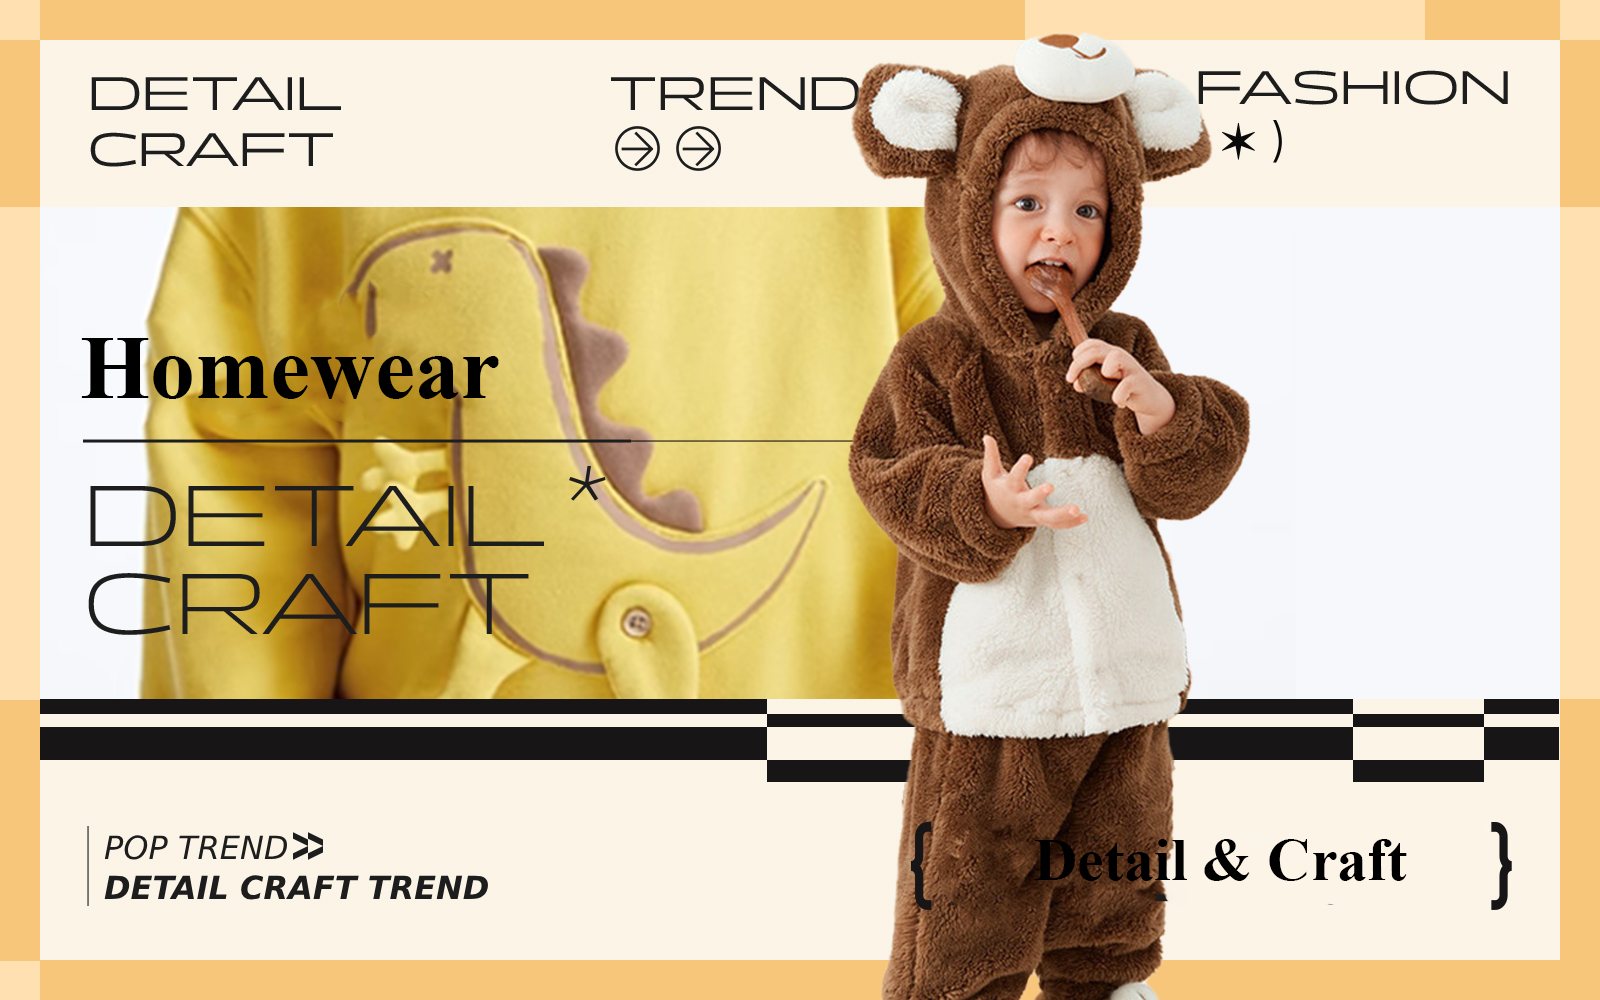 Animal Series -- The Detail & Craft Trend for Kids' Homewear